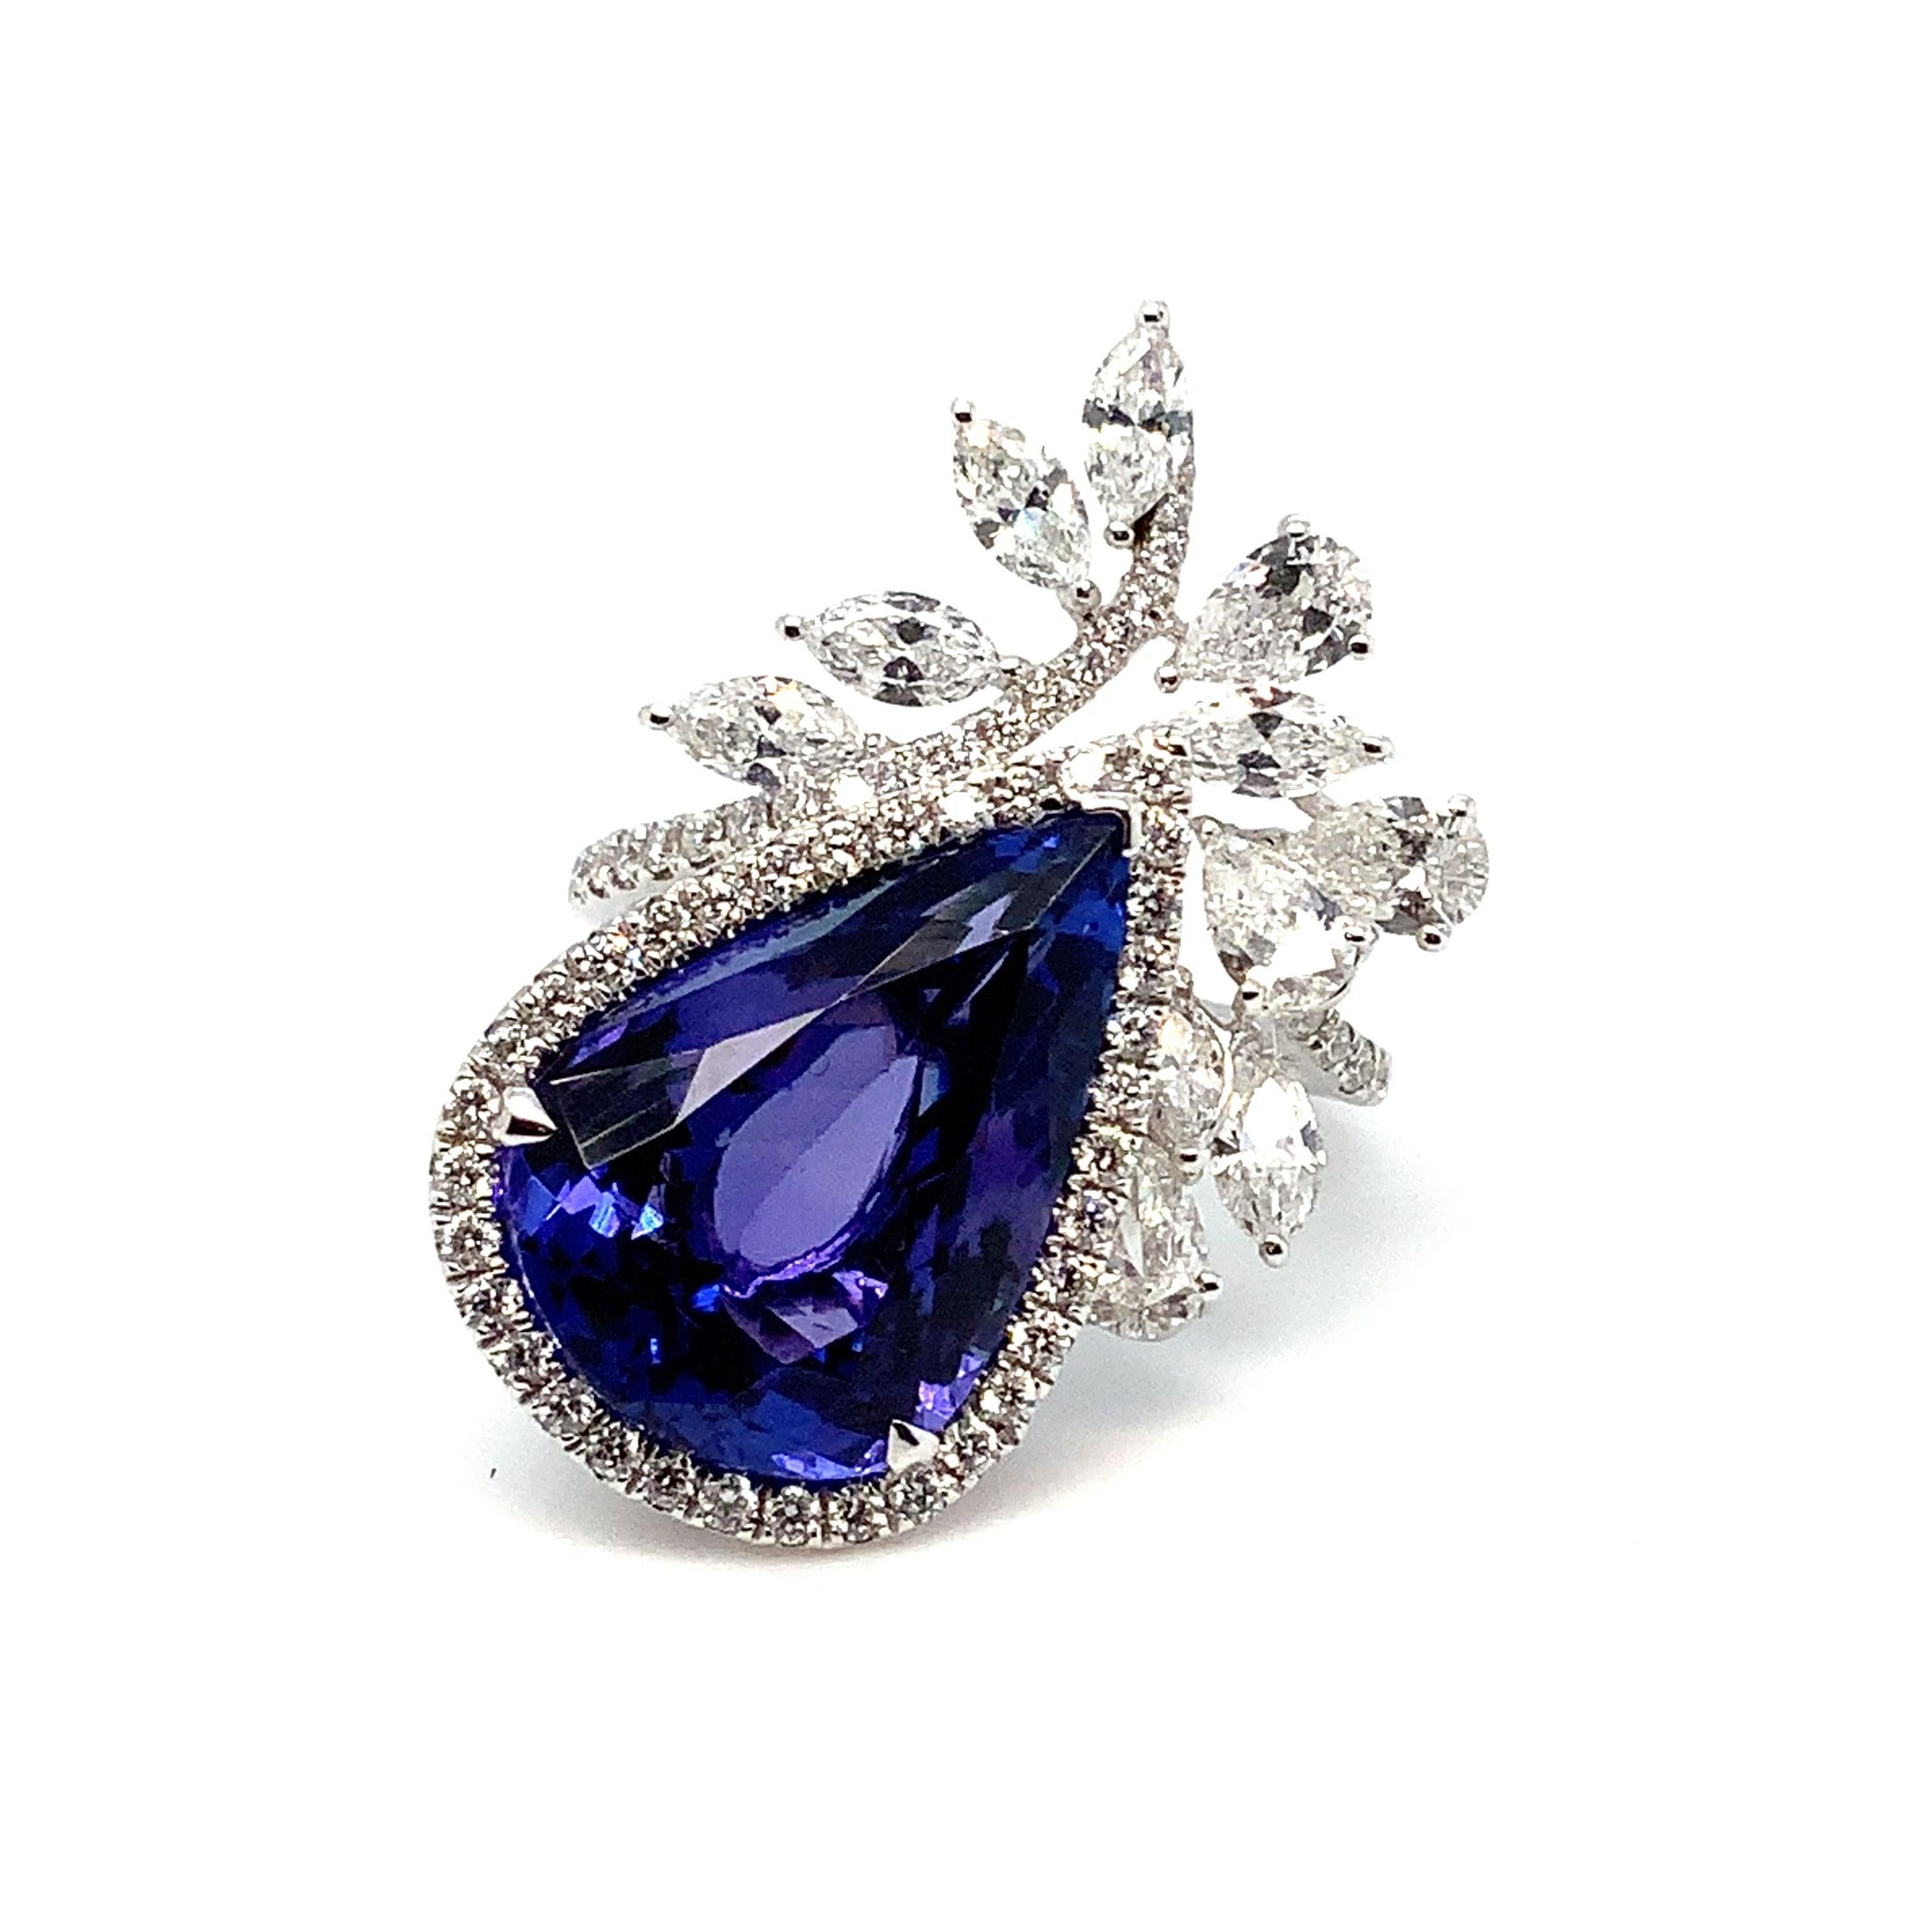 This exquisite Right Hand Ring boasts superior craftsmanship and breathtaking appeal. Its sleek 18K White Gold setting highlights the unparalleled design of the piece. The ring features an impressive 9.29 carats of Pear Shaped Gem Quality Tanzanite,